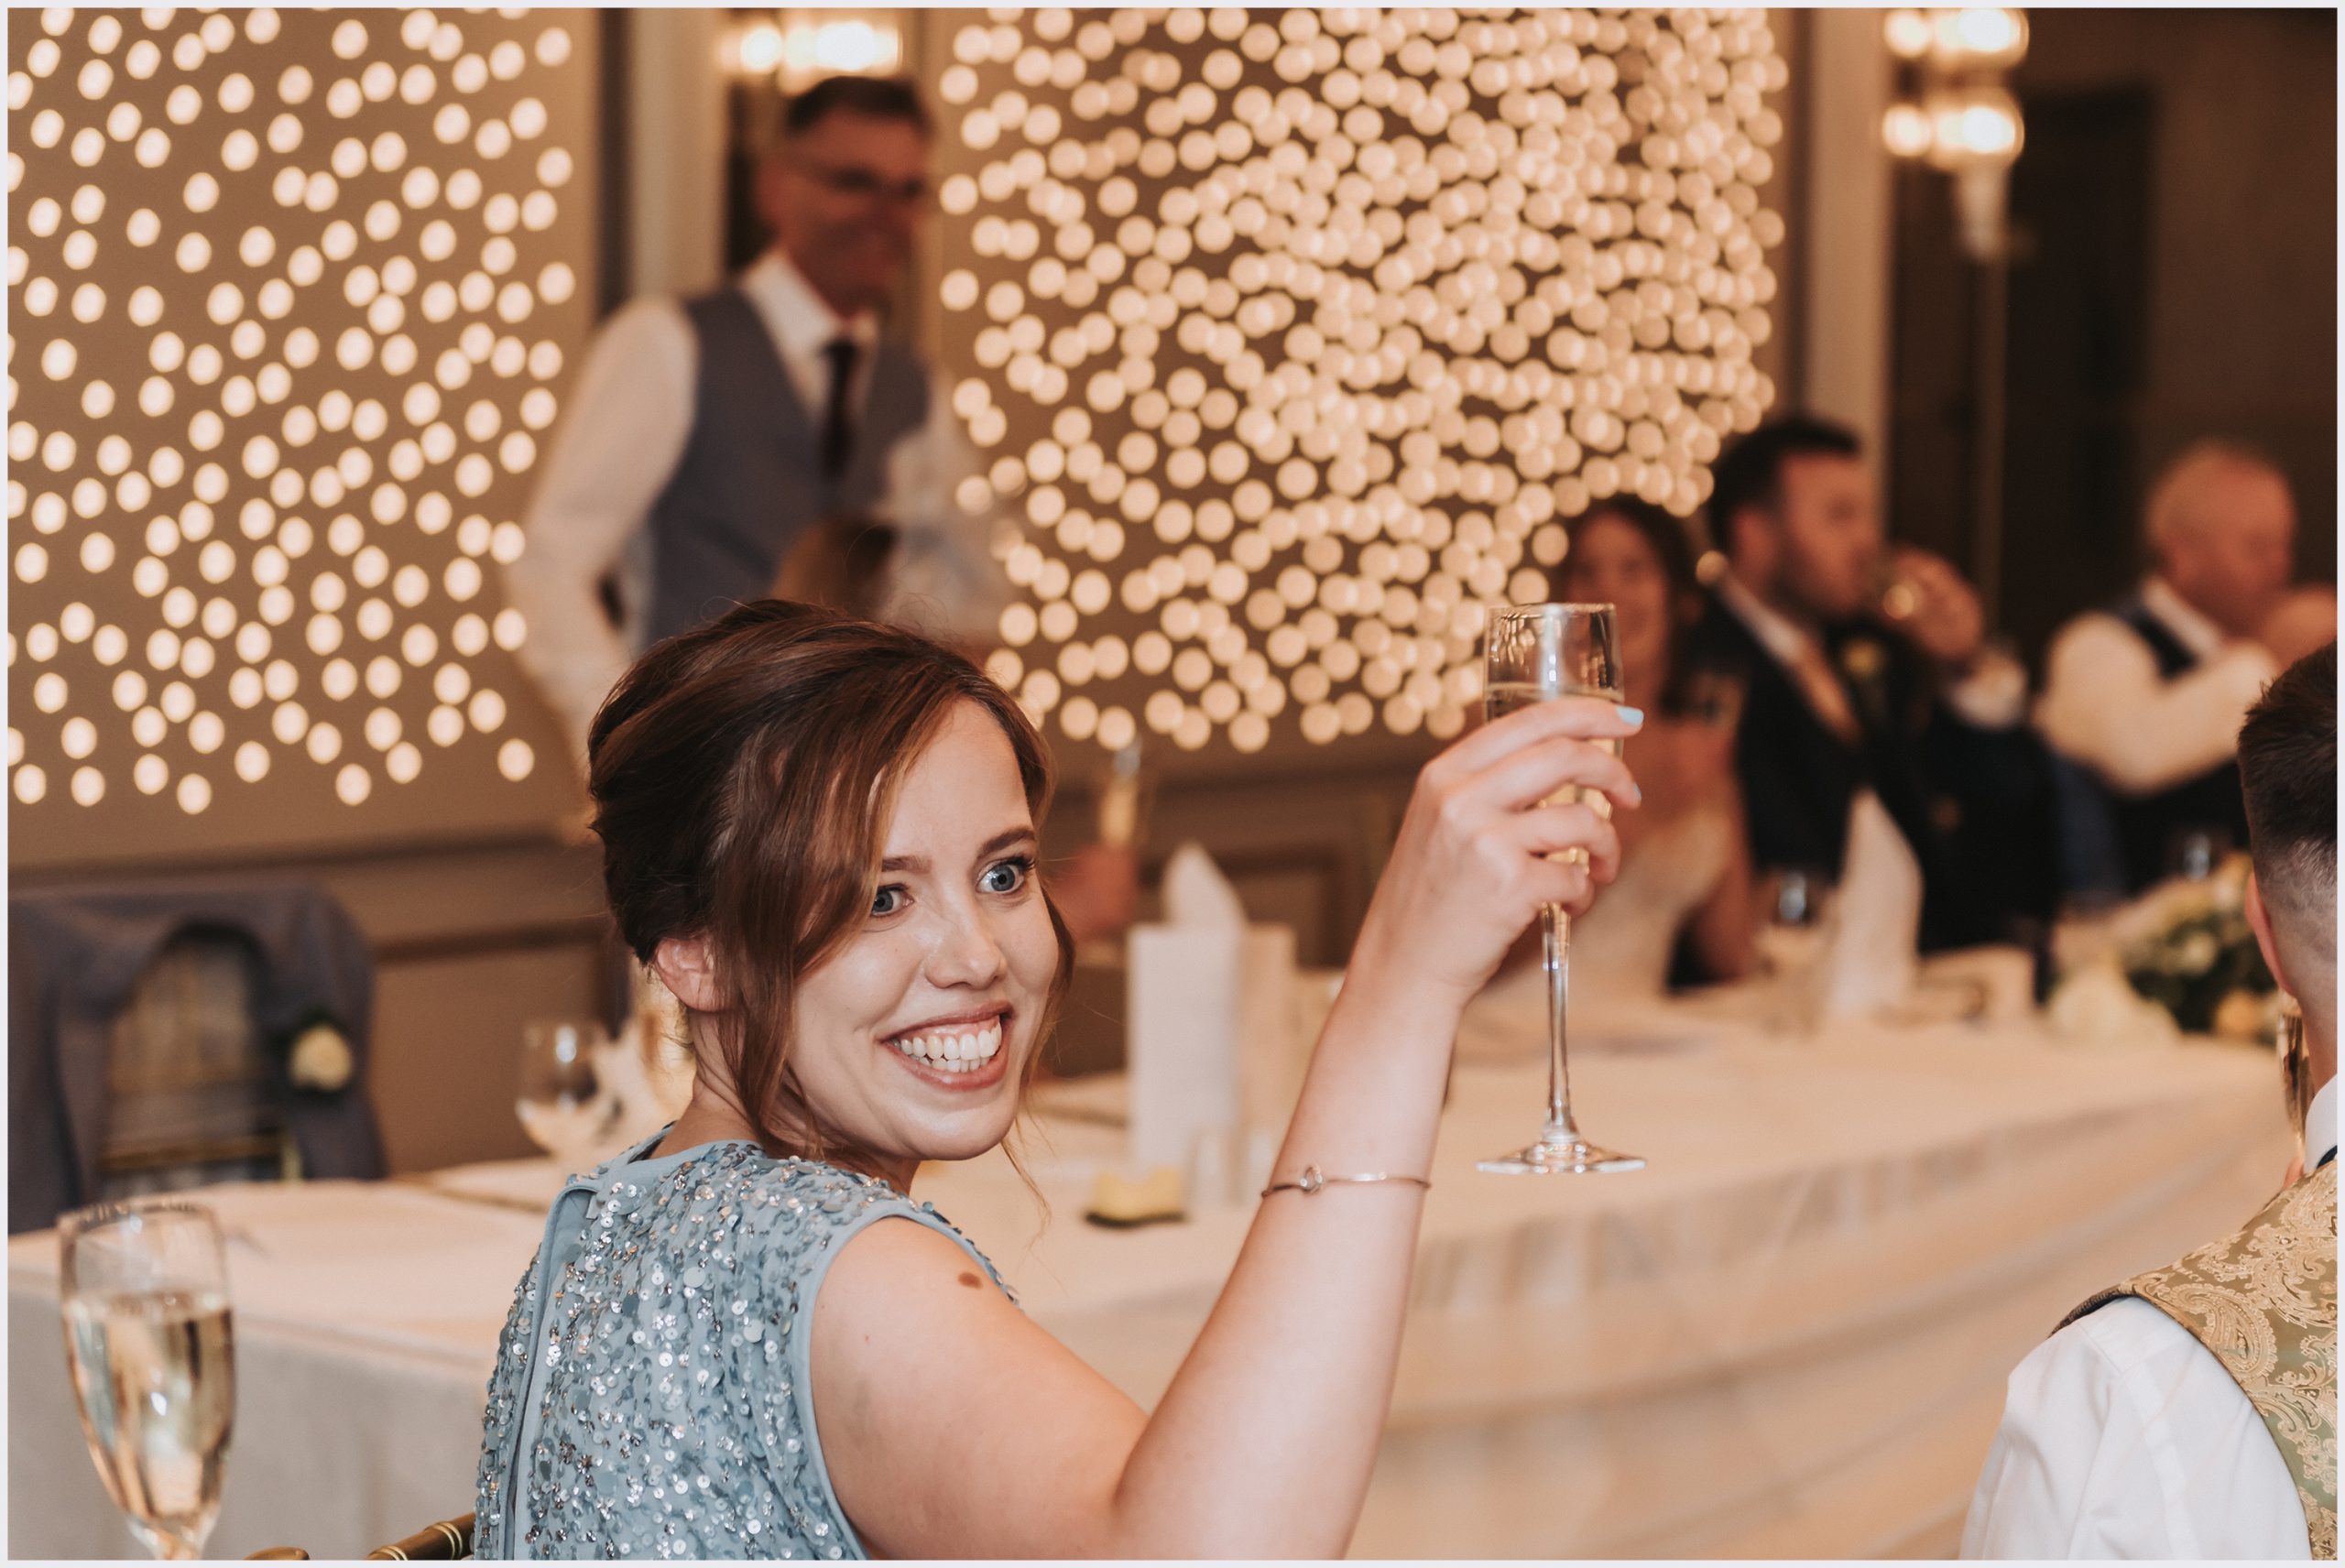 A smiling bridesmaids holds her champagne flute up in the air while making a toast to the happy couple.  Image captured by Helena Jayne Photography a wedding photographer based in Chester